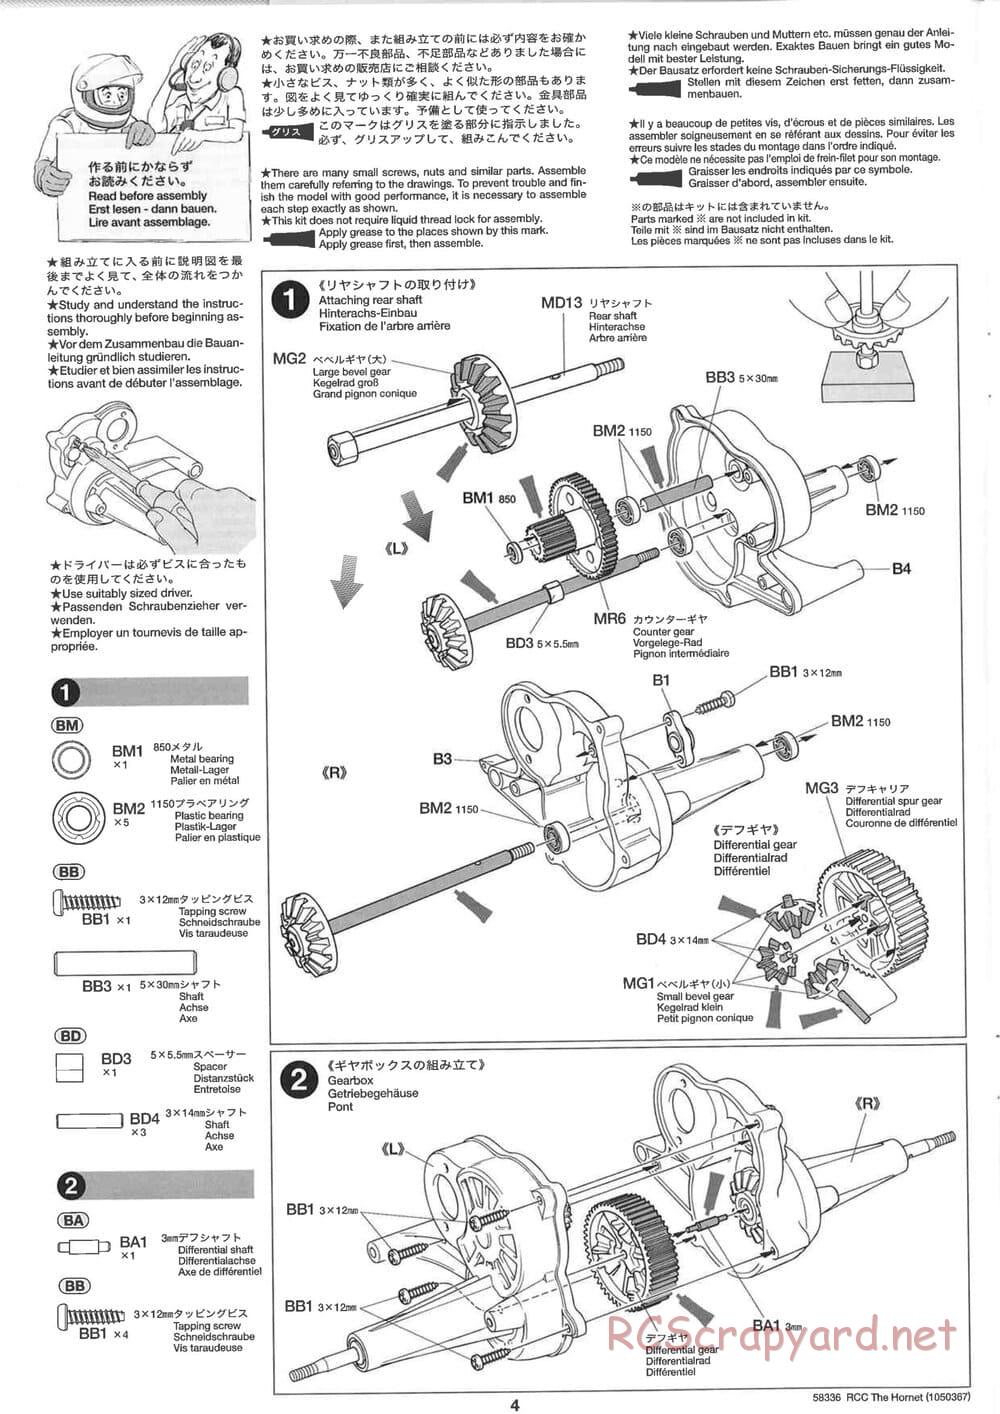 Tamiya - The Hornet (2004) - GH Chassis - Manual - Page 4